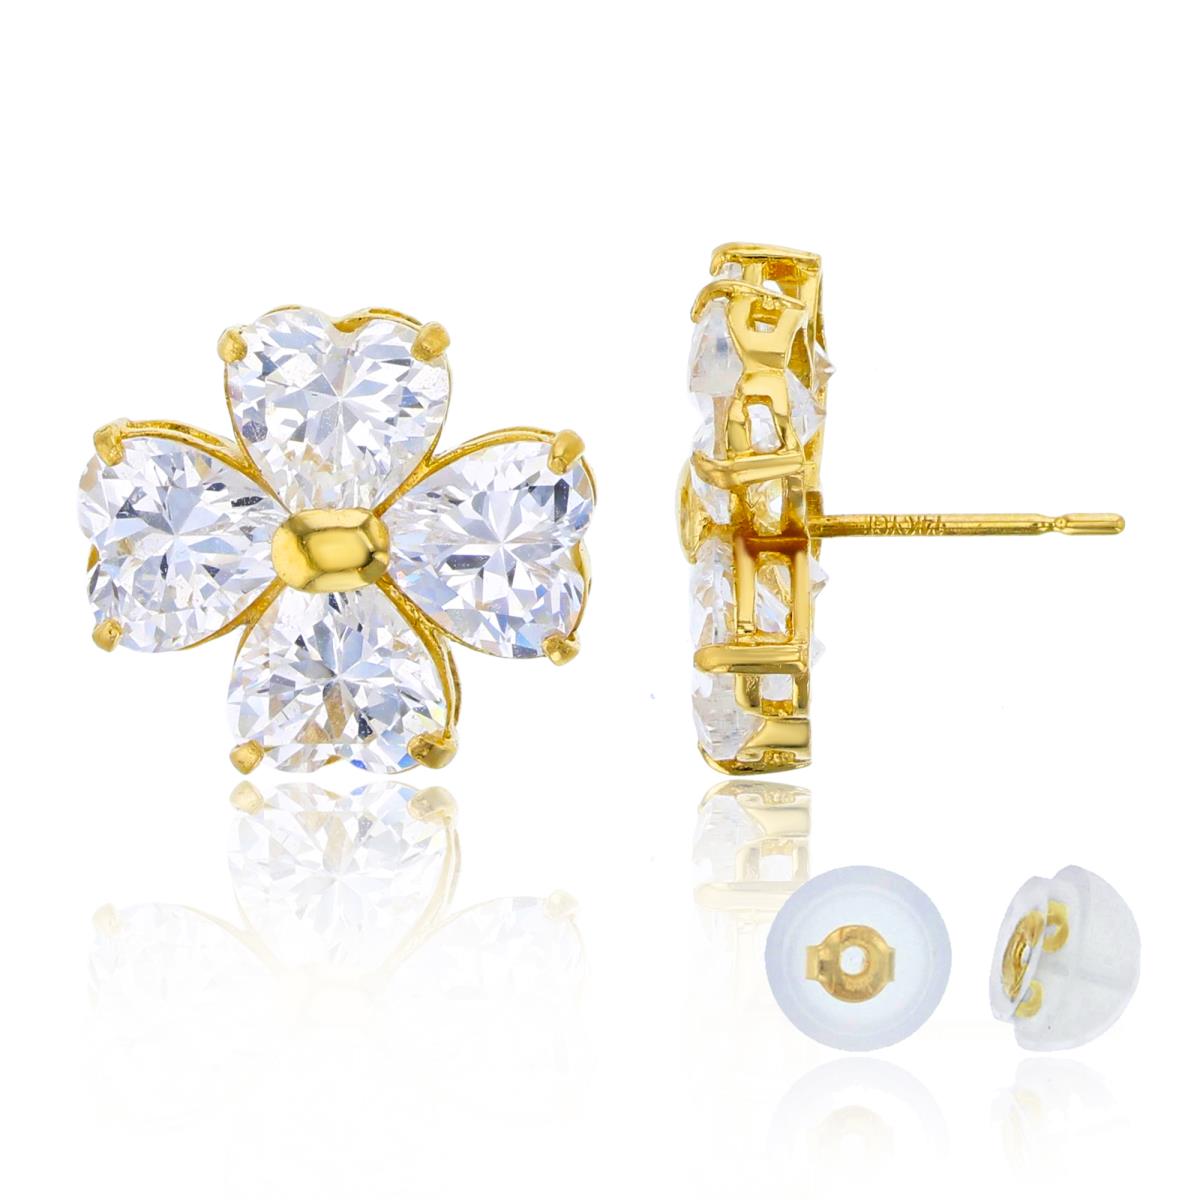 10K Yellow Gold 6mm HS CZ Flower Stud Earring with Silicon Backs